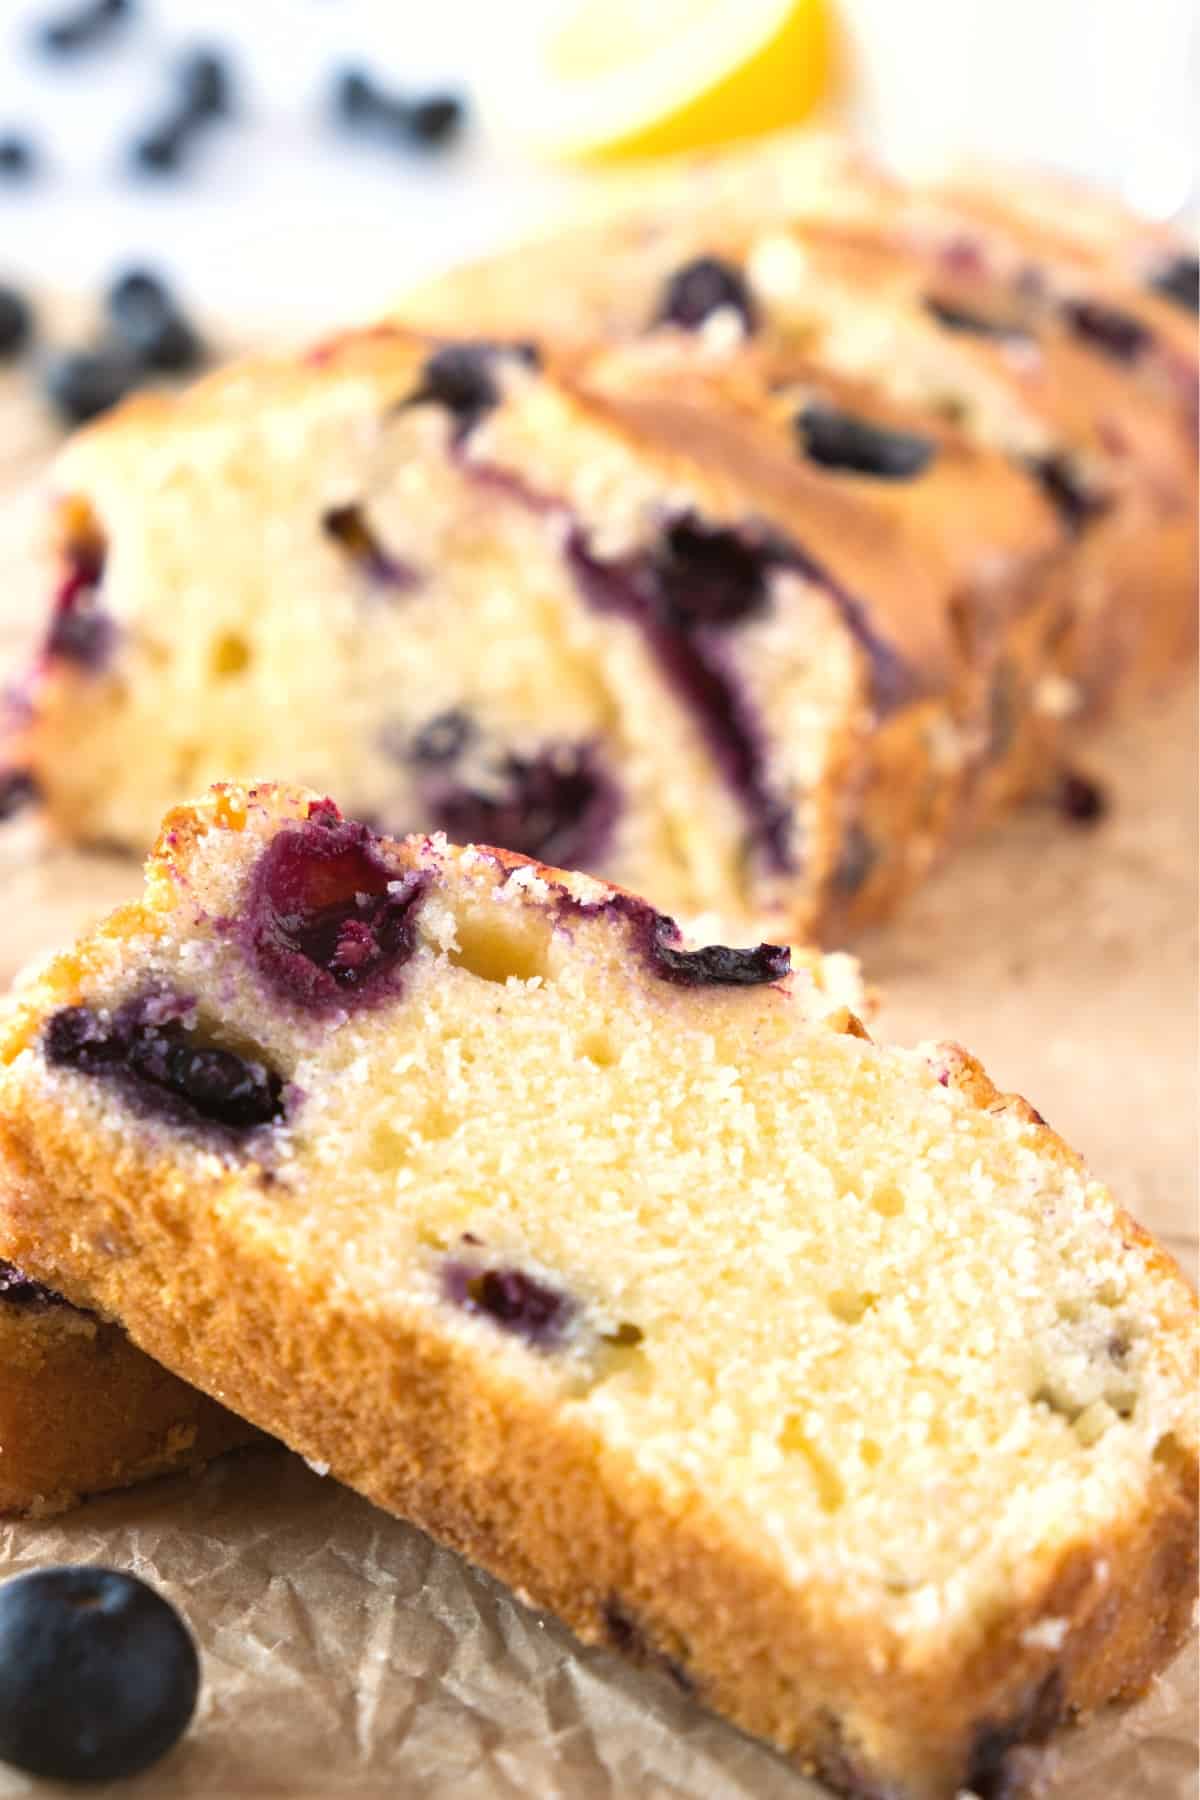 Up close shot of a slice of gluten-free blueberry loaf.